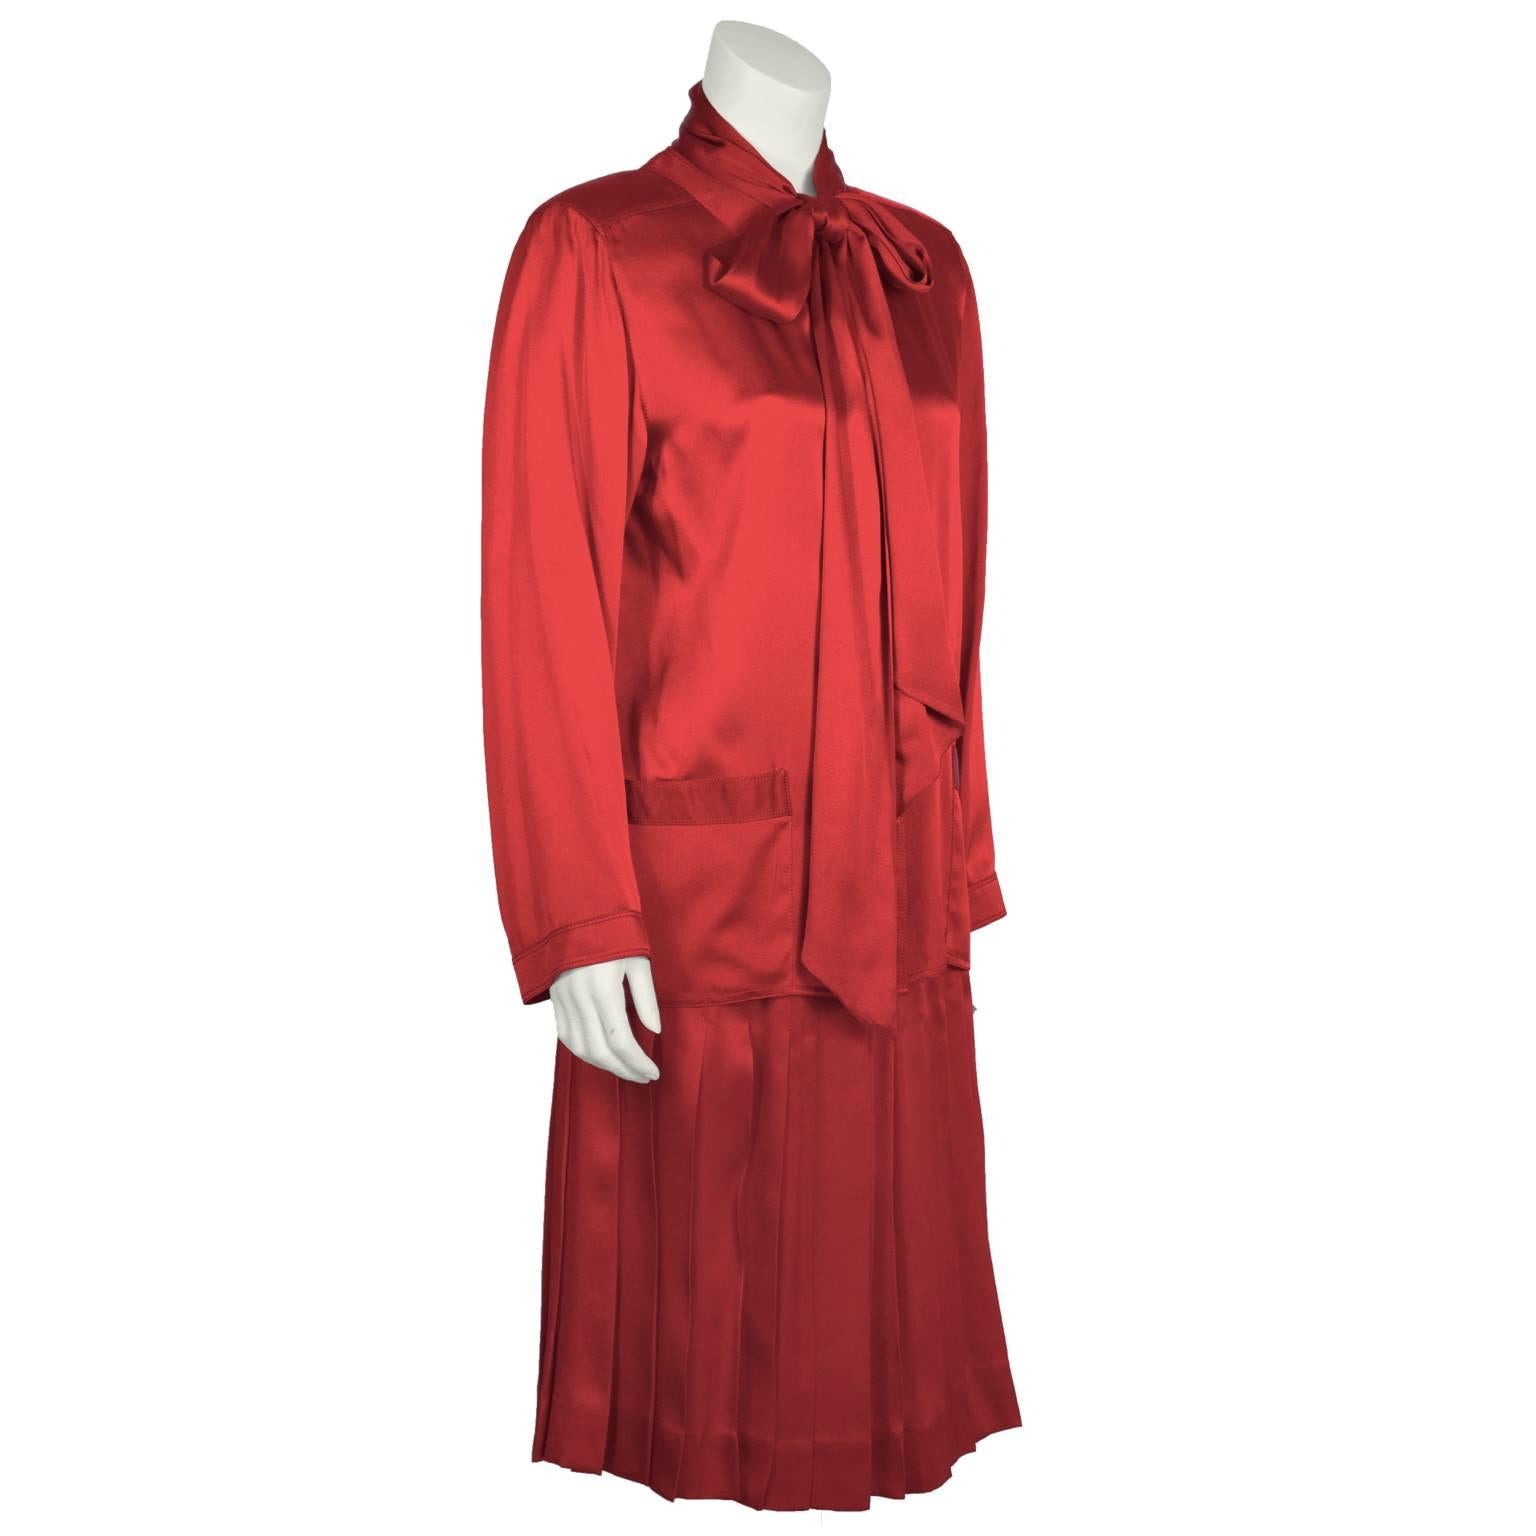 1980's Chanel red satin ensemble featuring a blouse with self tie bow and a stitch pleated. The blouse features a banded cardigan-style neckline with gold CC buttons down the front padded shoulders, and front hip pockets. Pleated fitted skirt